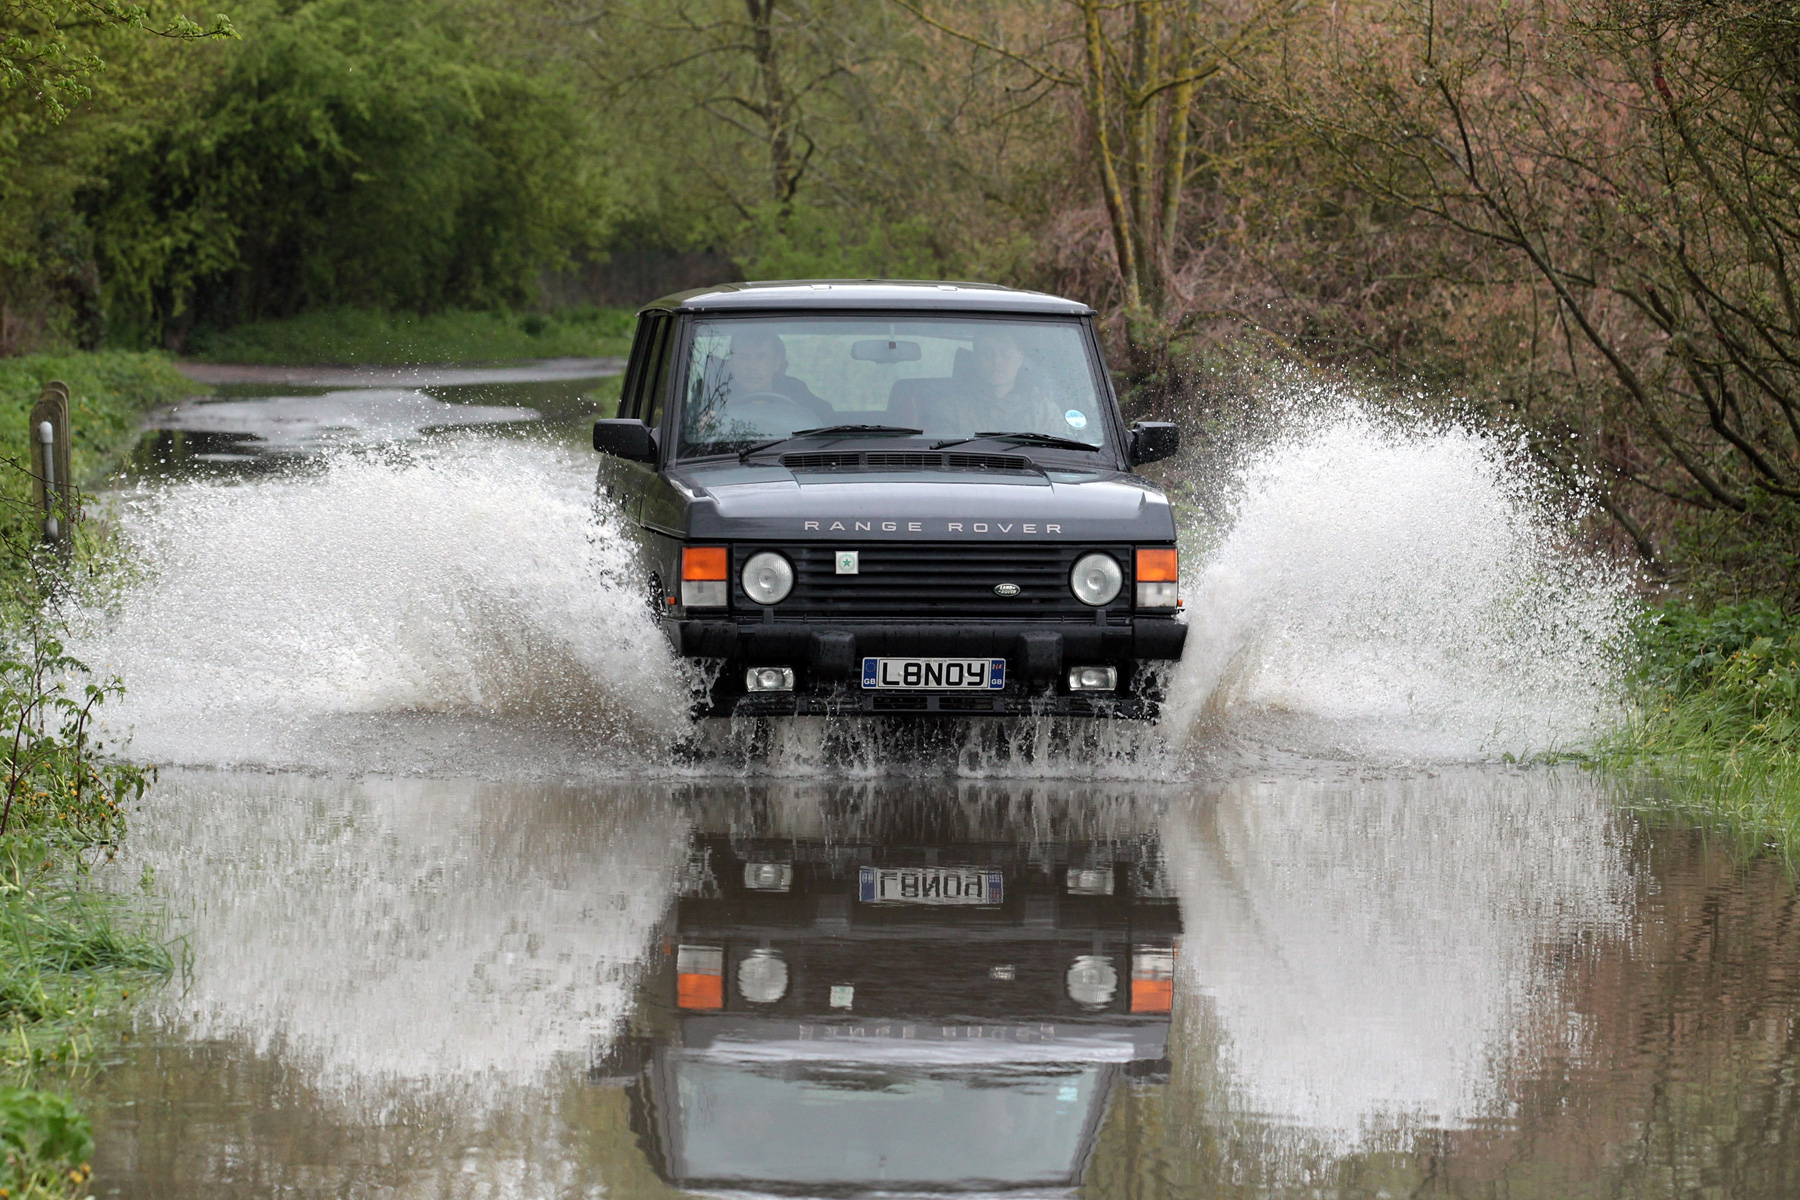 17_History_Range_Rover_Getty-Images.jpg